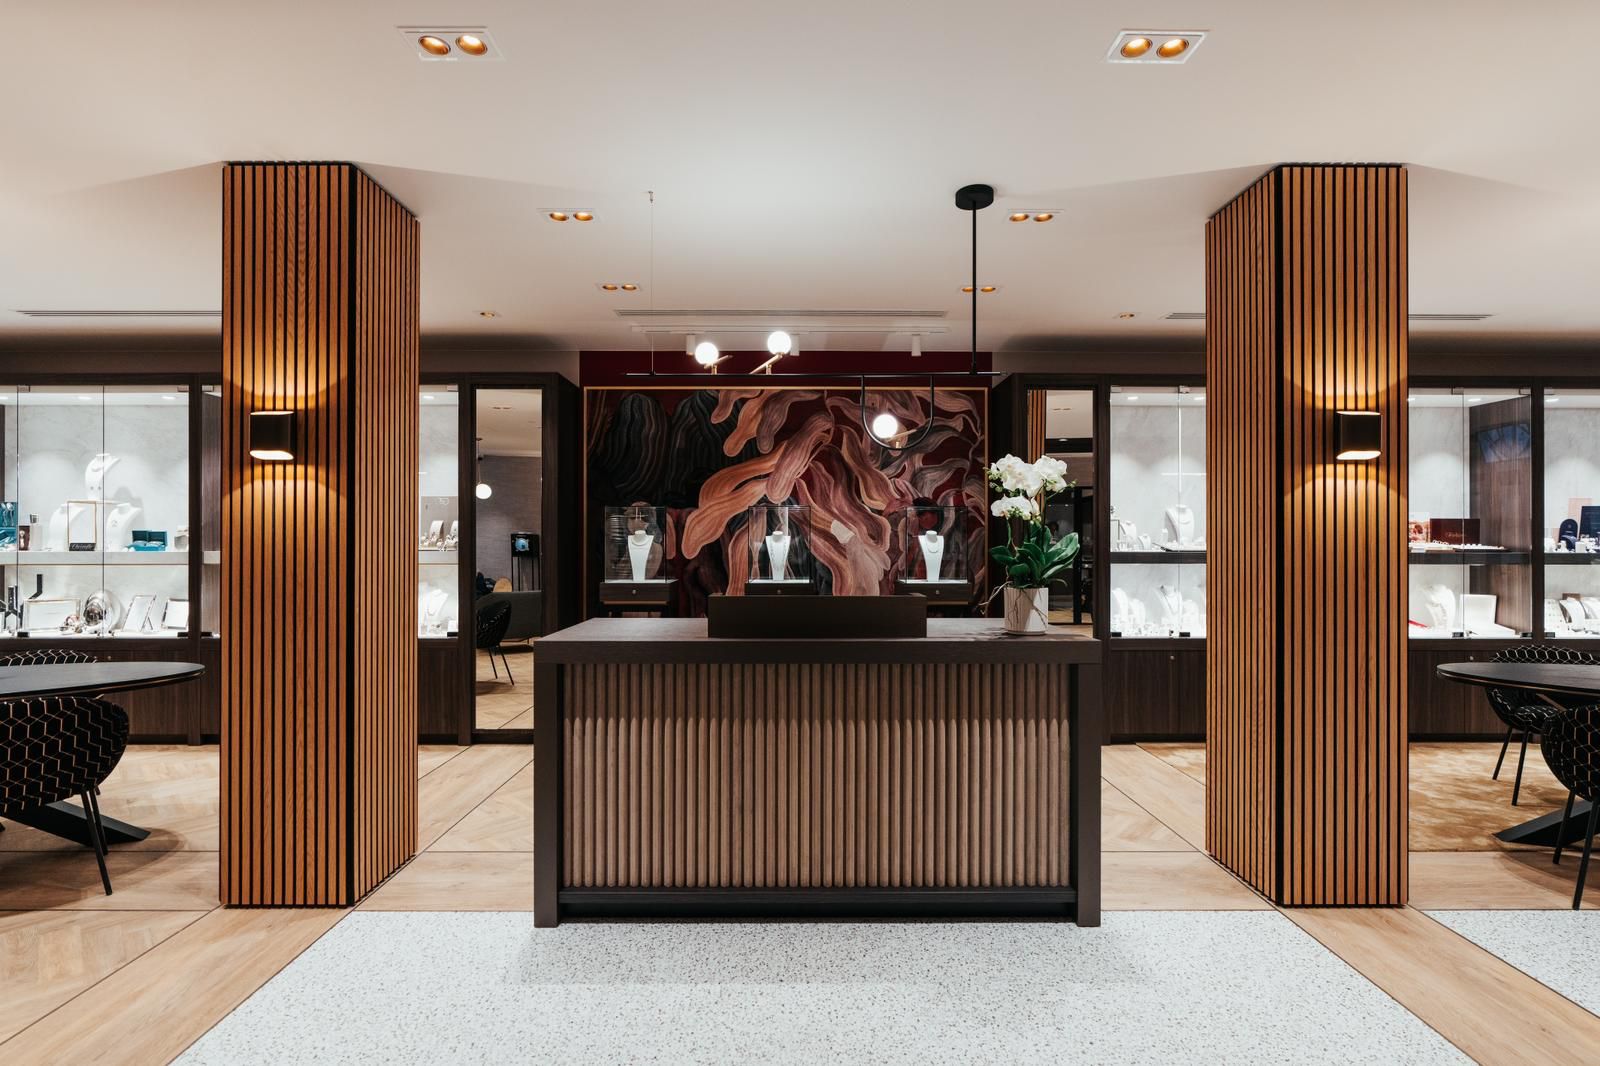 View of the store of jeweler Stievenart Belgium with central sales counter and wall with custom-made display cases